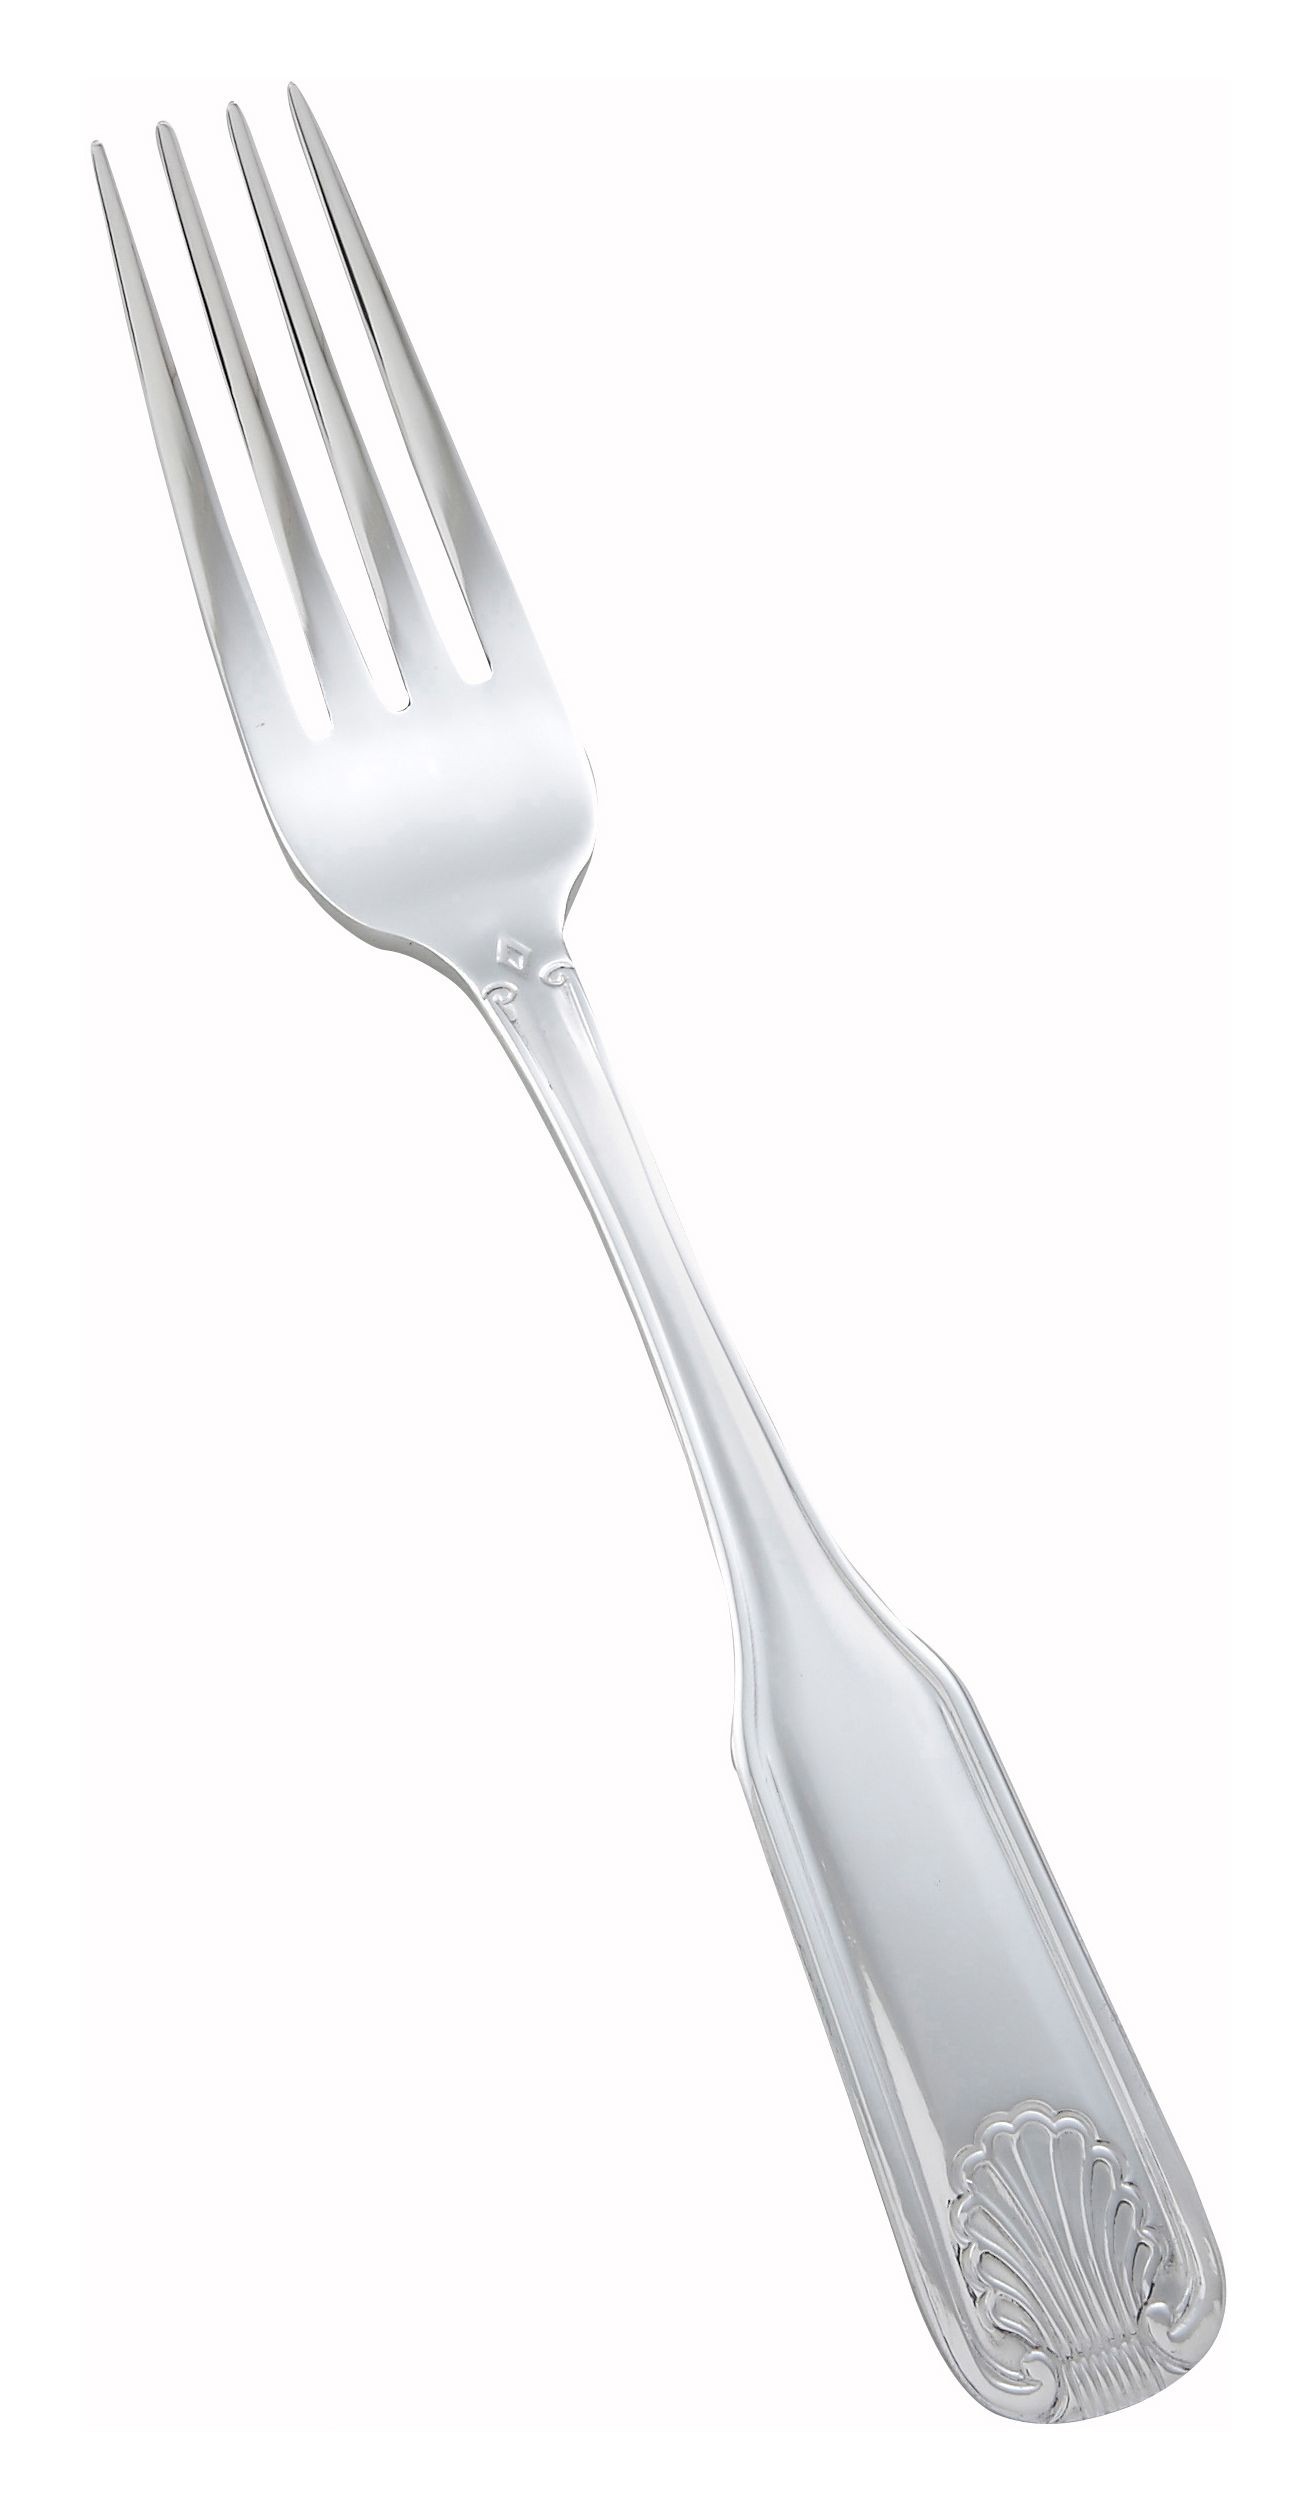 Winco 0006-05 Toulouse Heavy Mirror Finish Stainless Steel Dinner Fork (12/Pack)